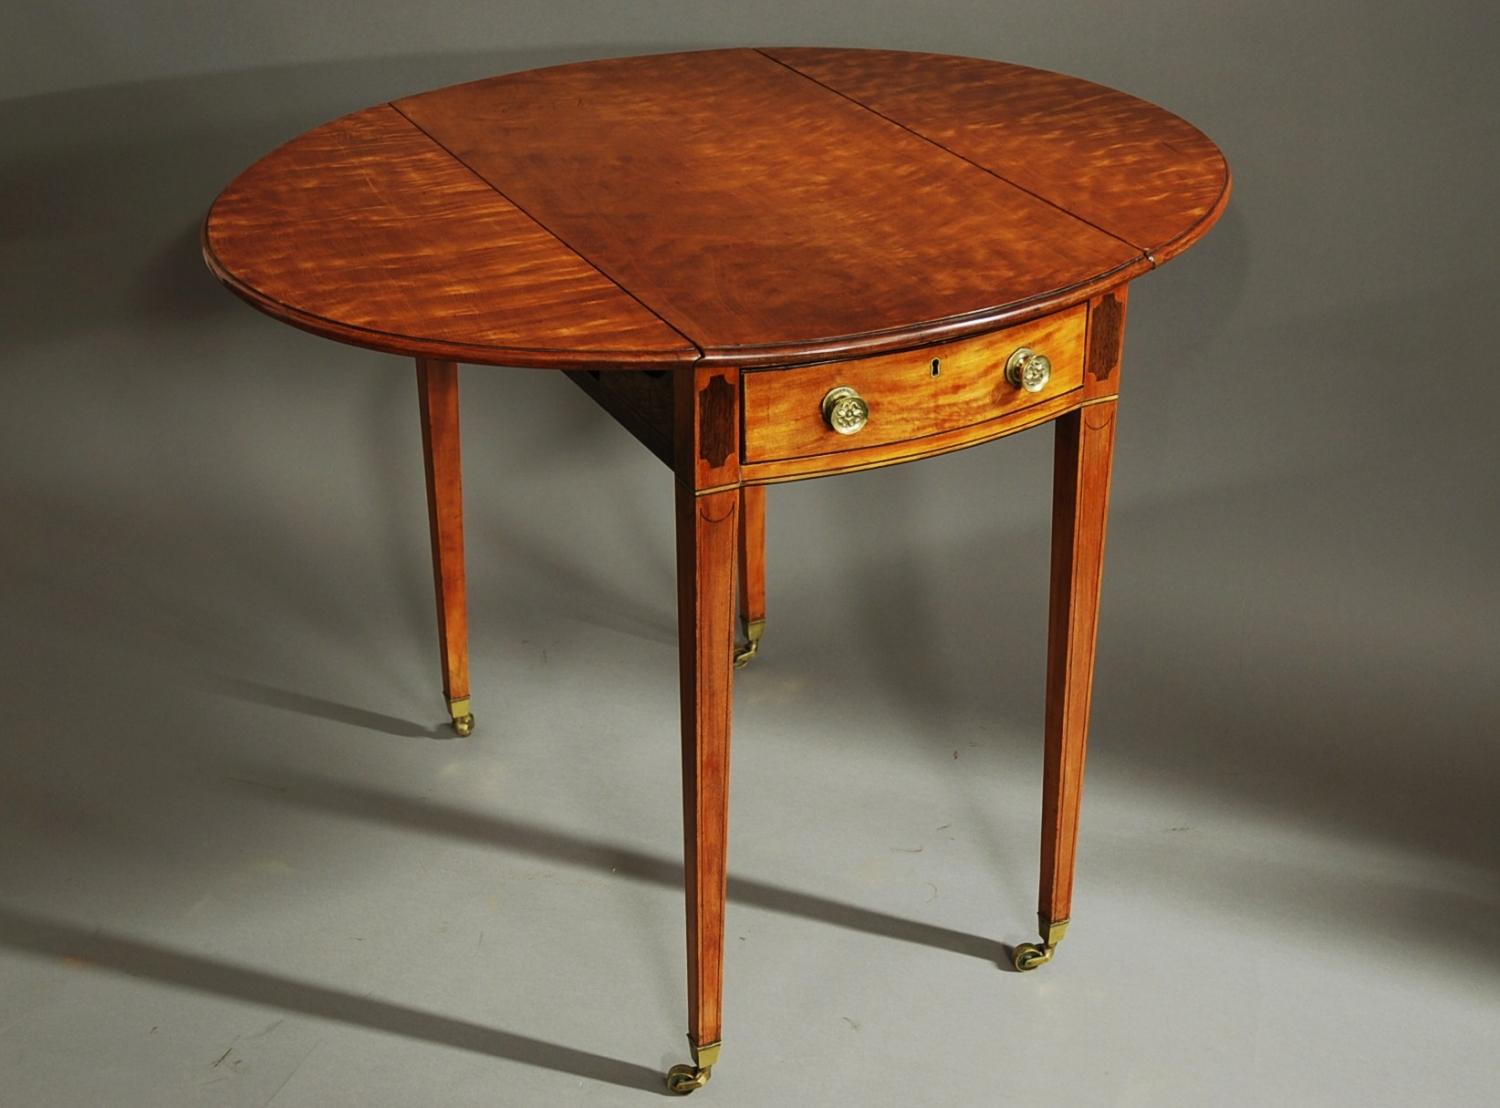 Late 19thc oval satinwood Pembroke table